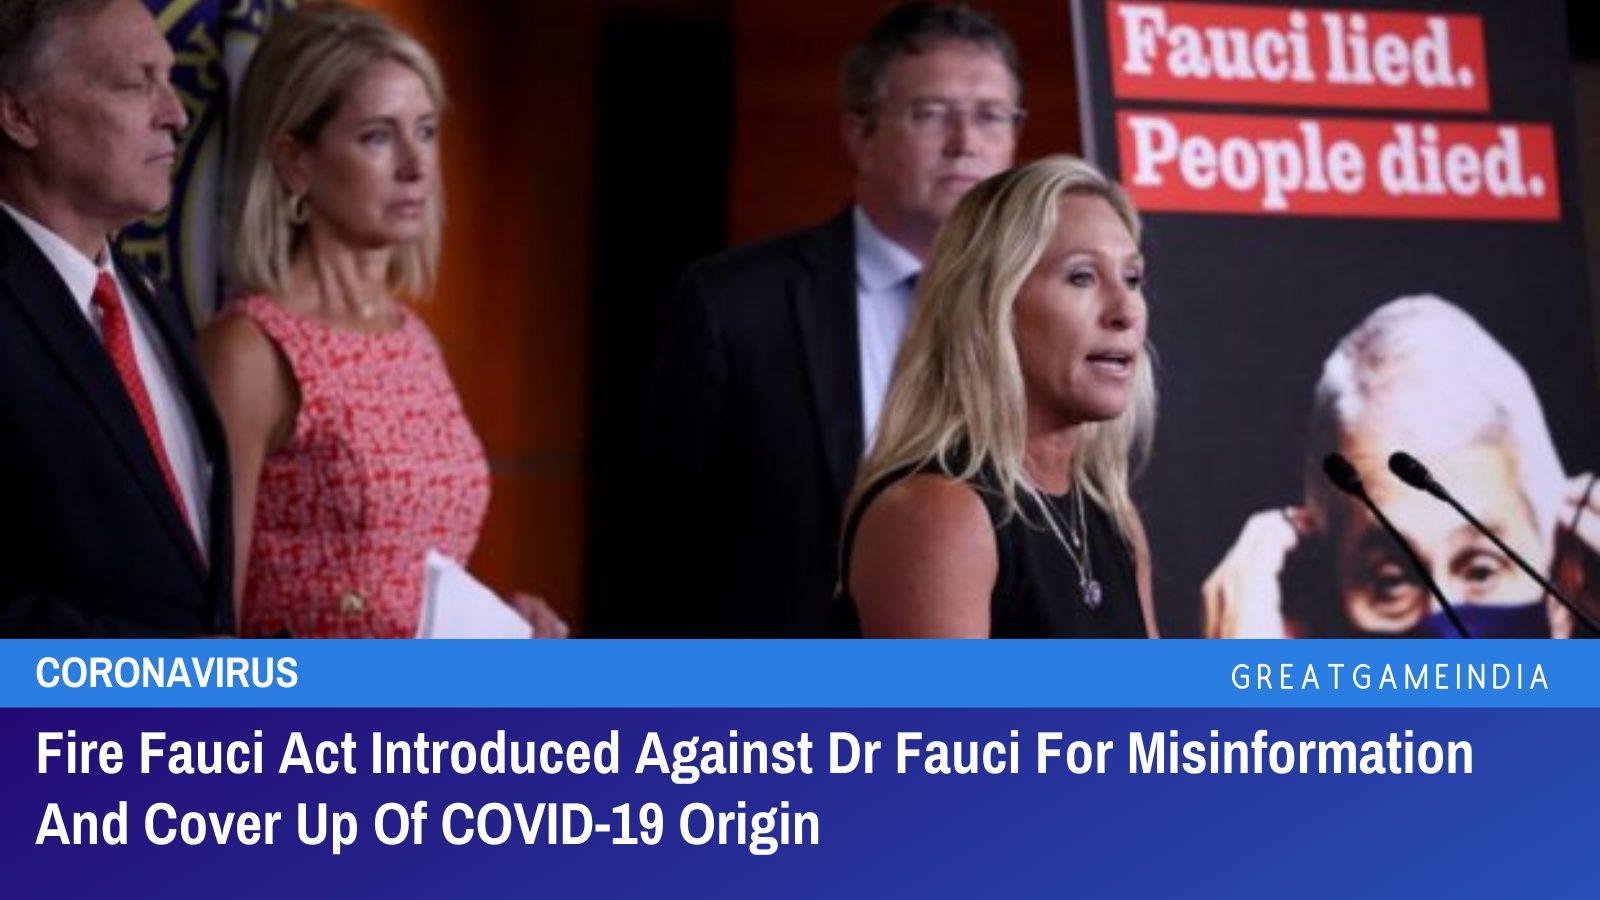 Fire Fauci Act Introduced Against Dr Fauci For Misinformation And Cover Up Of COVID-19 Origin